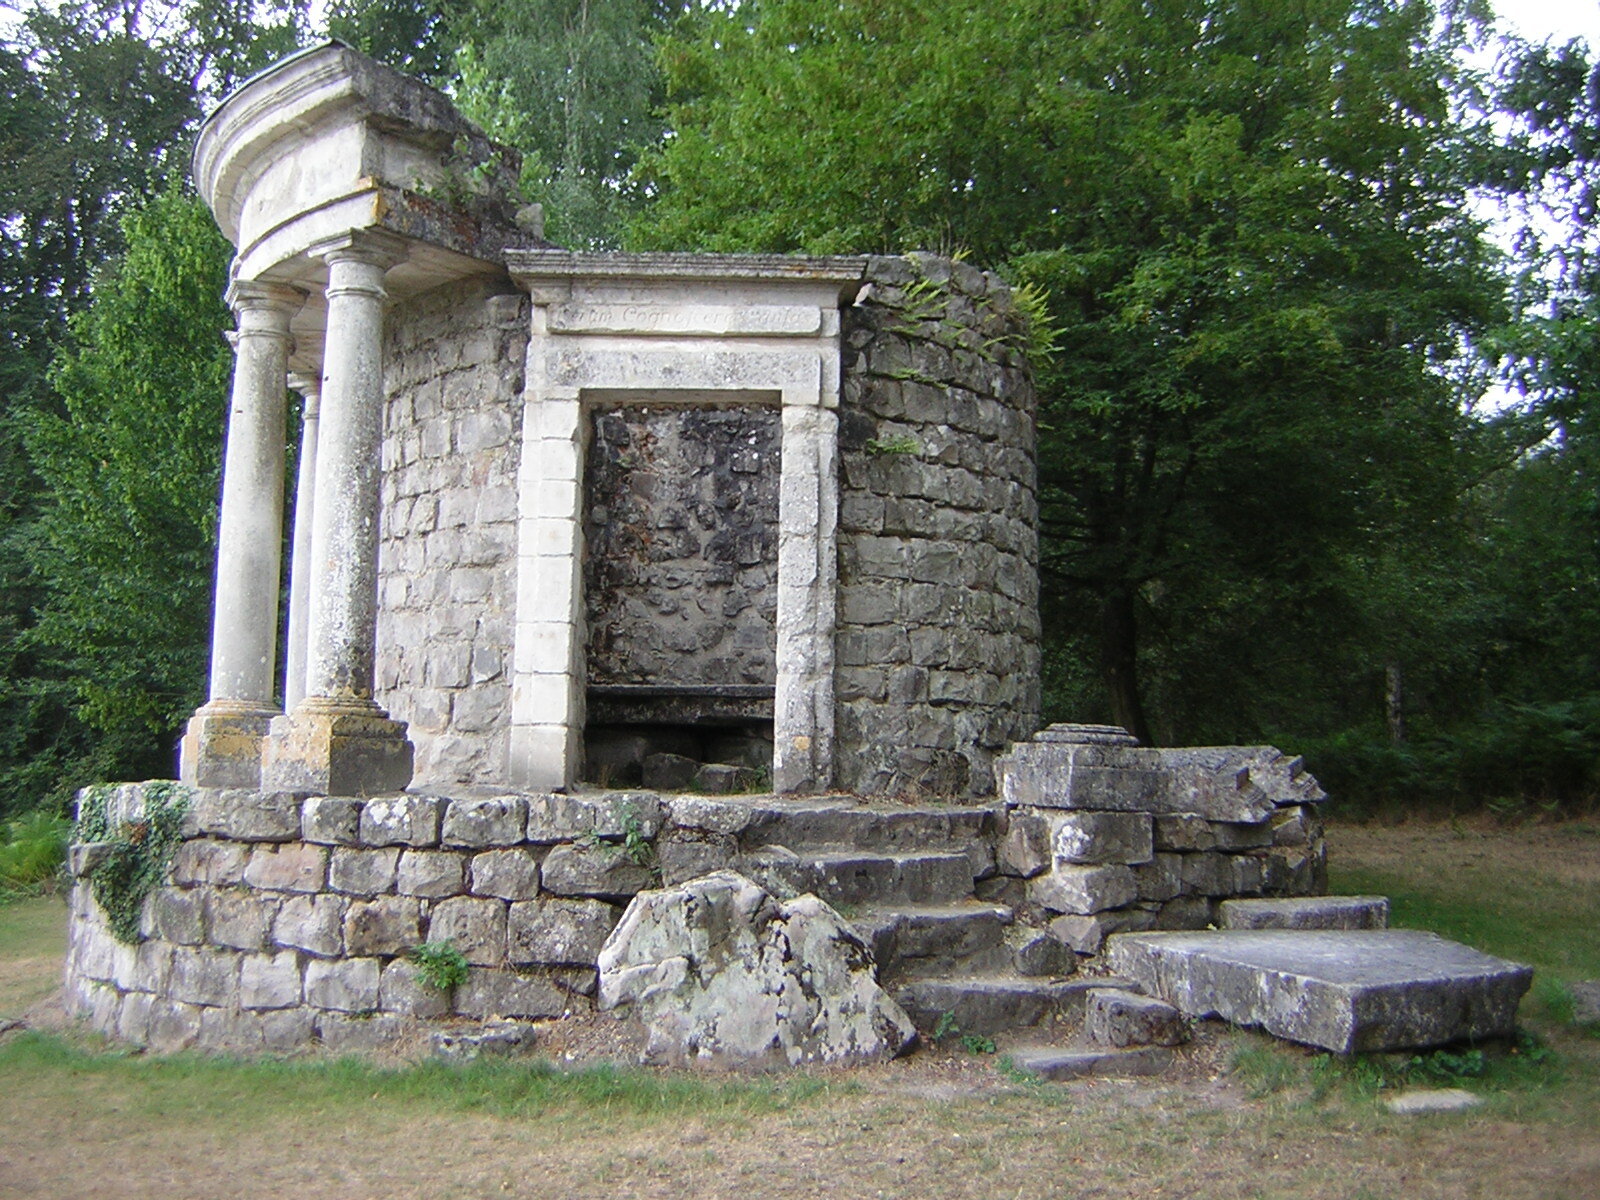 The Temple of Philosophy at ErmenonvilleBy Parisette - Own work, CC BY-SA 3.0, https://commons.wikimedia.org/w/index.php?curid=1046507